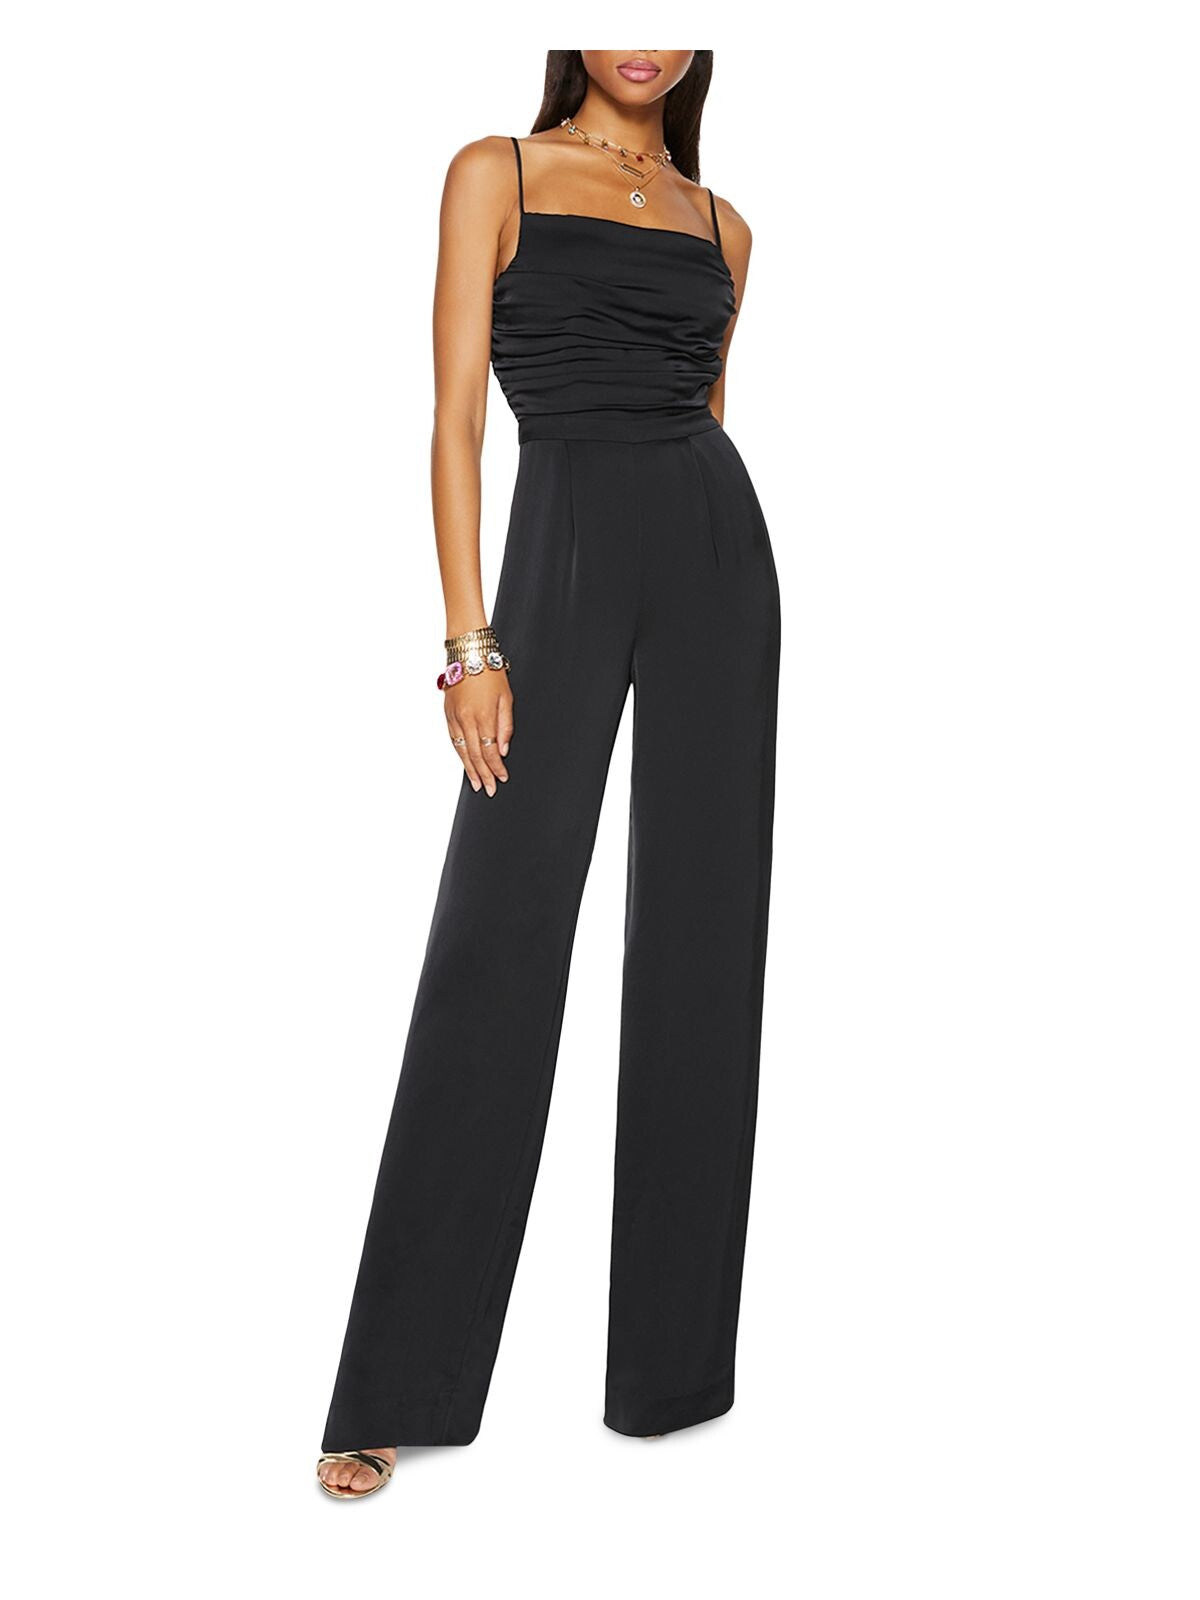 RAMY BROOK Womens Black Zippered Ruched Pocketed Pleated Spaghetti Strap Square Neck Party Straight leg Jumpsuit 10